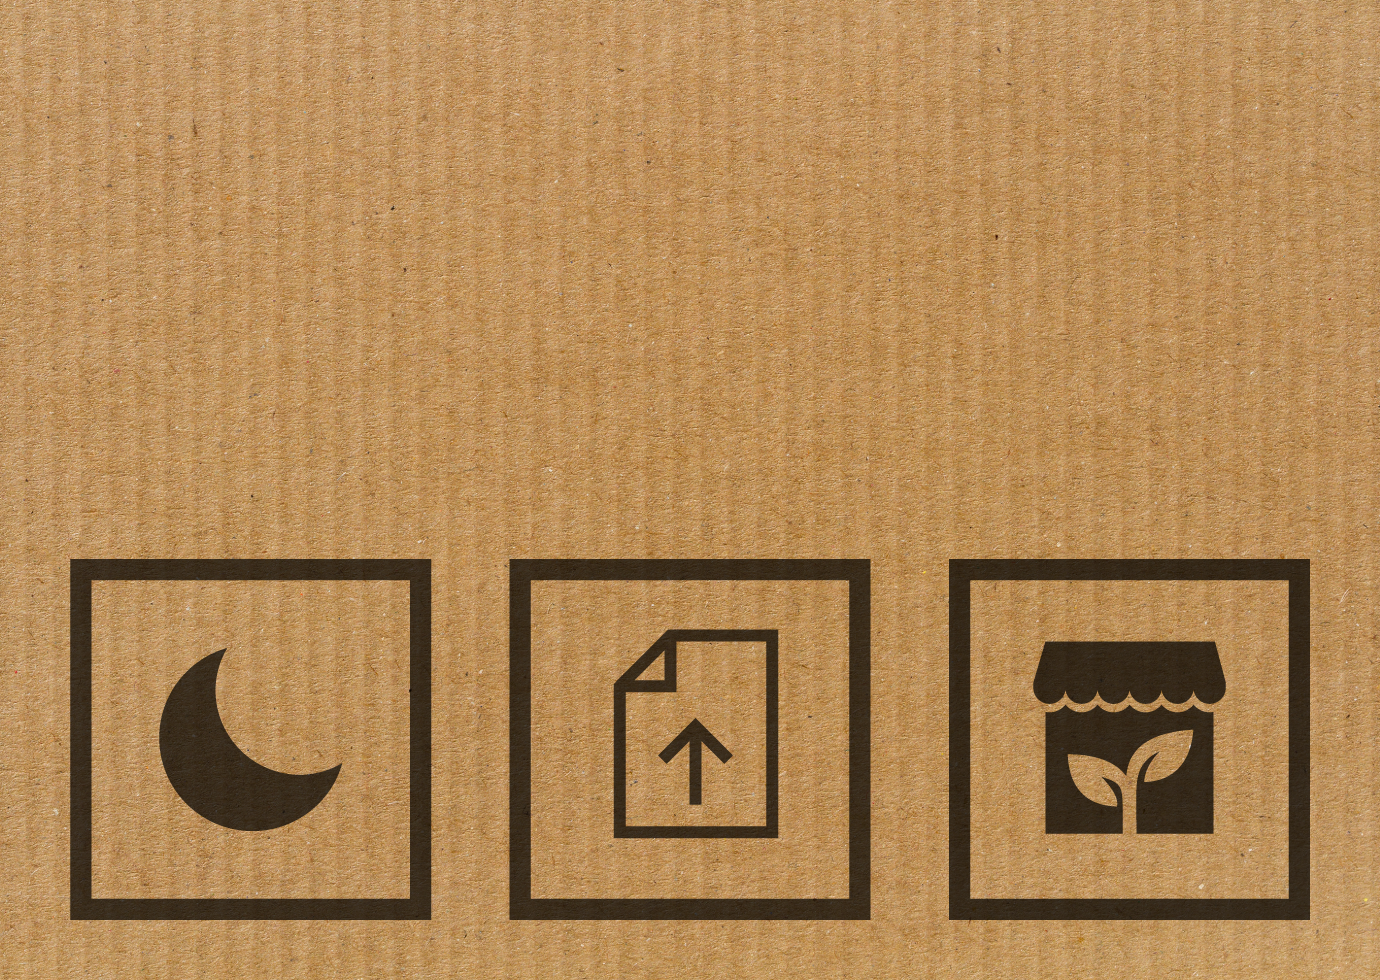 Cardboard background with symbols for dark mode, uploading paper document digitally, and eco-friendly businesses.